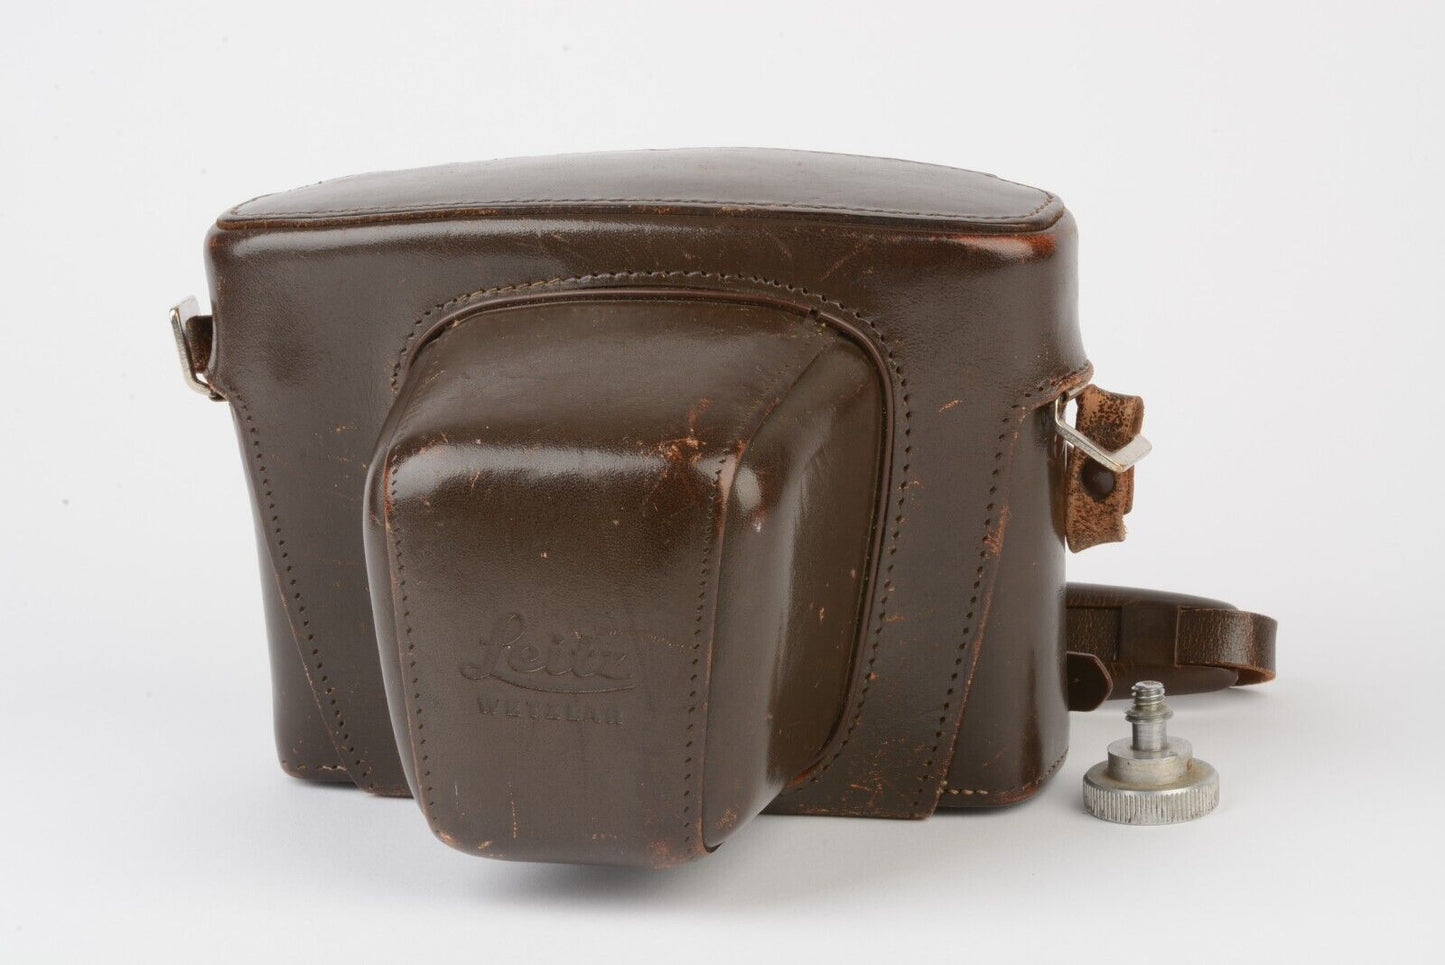 EXC++ LEICA M4 BROWN LEATHER EVEREADY CASE FOR M4, NICE